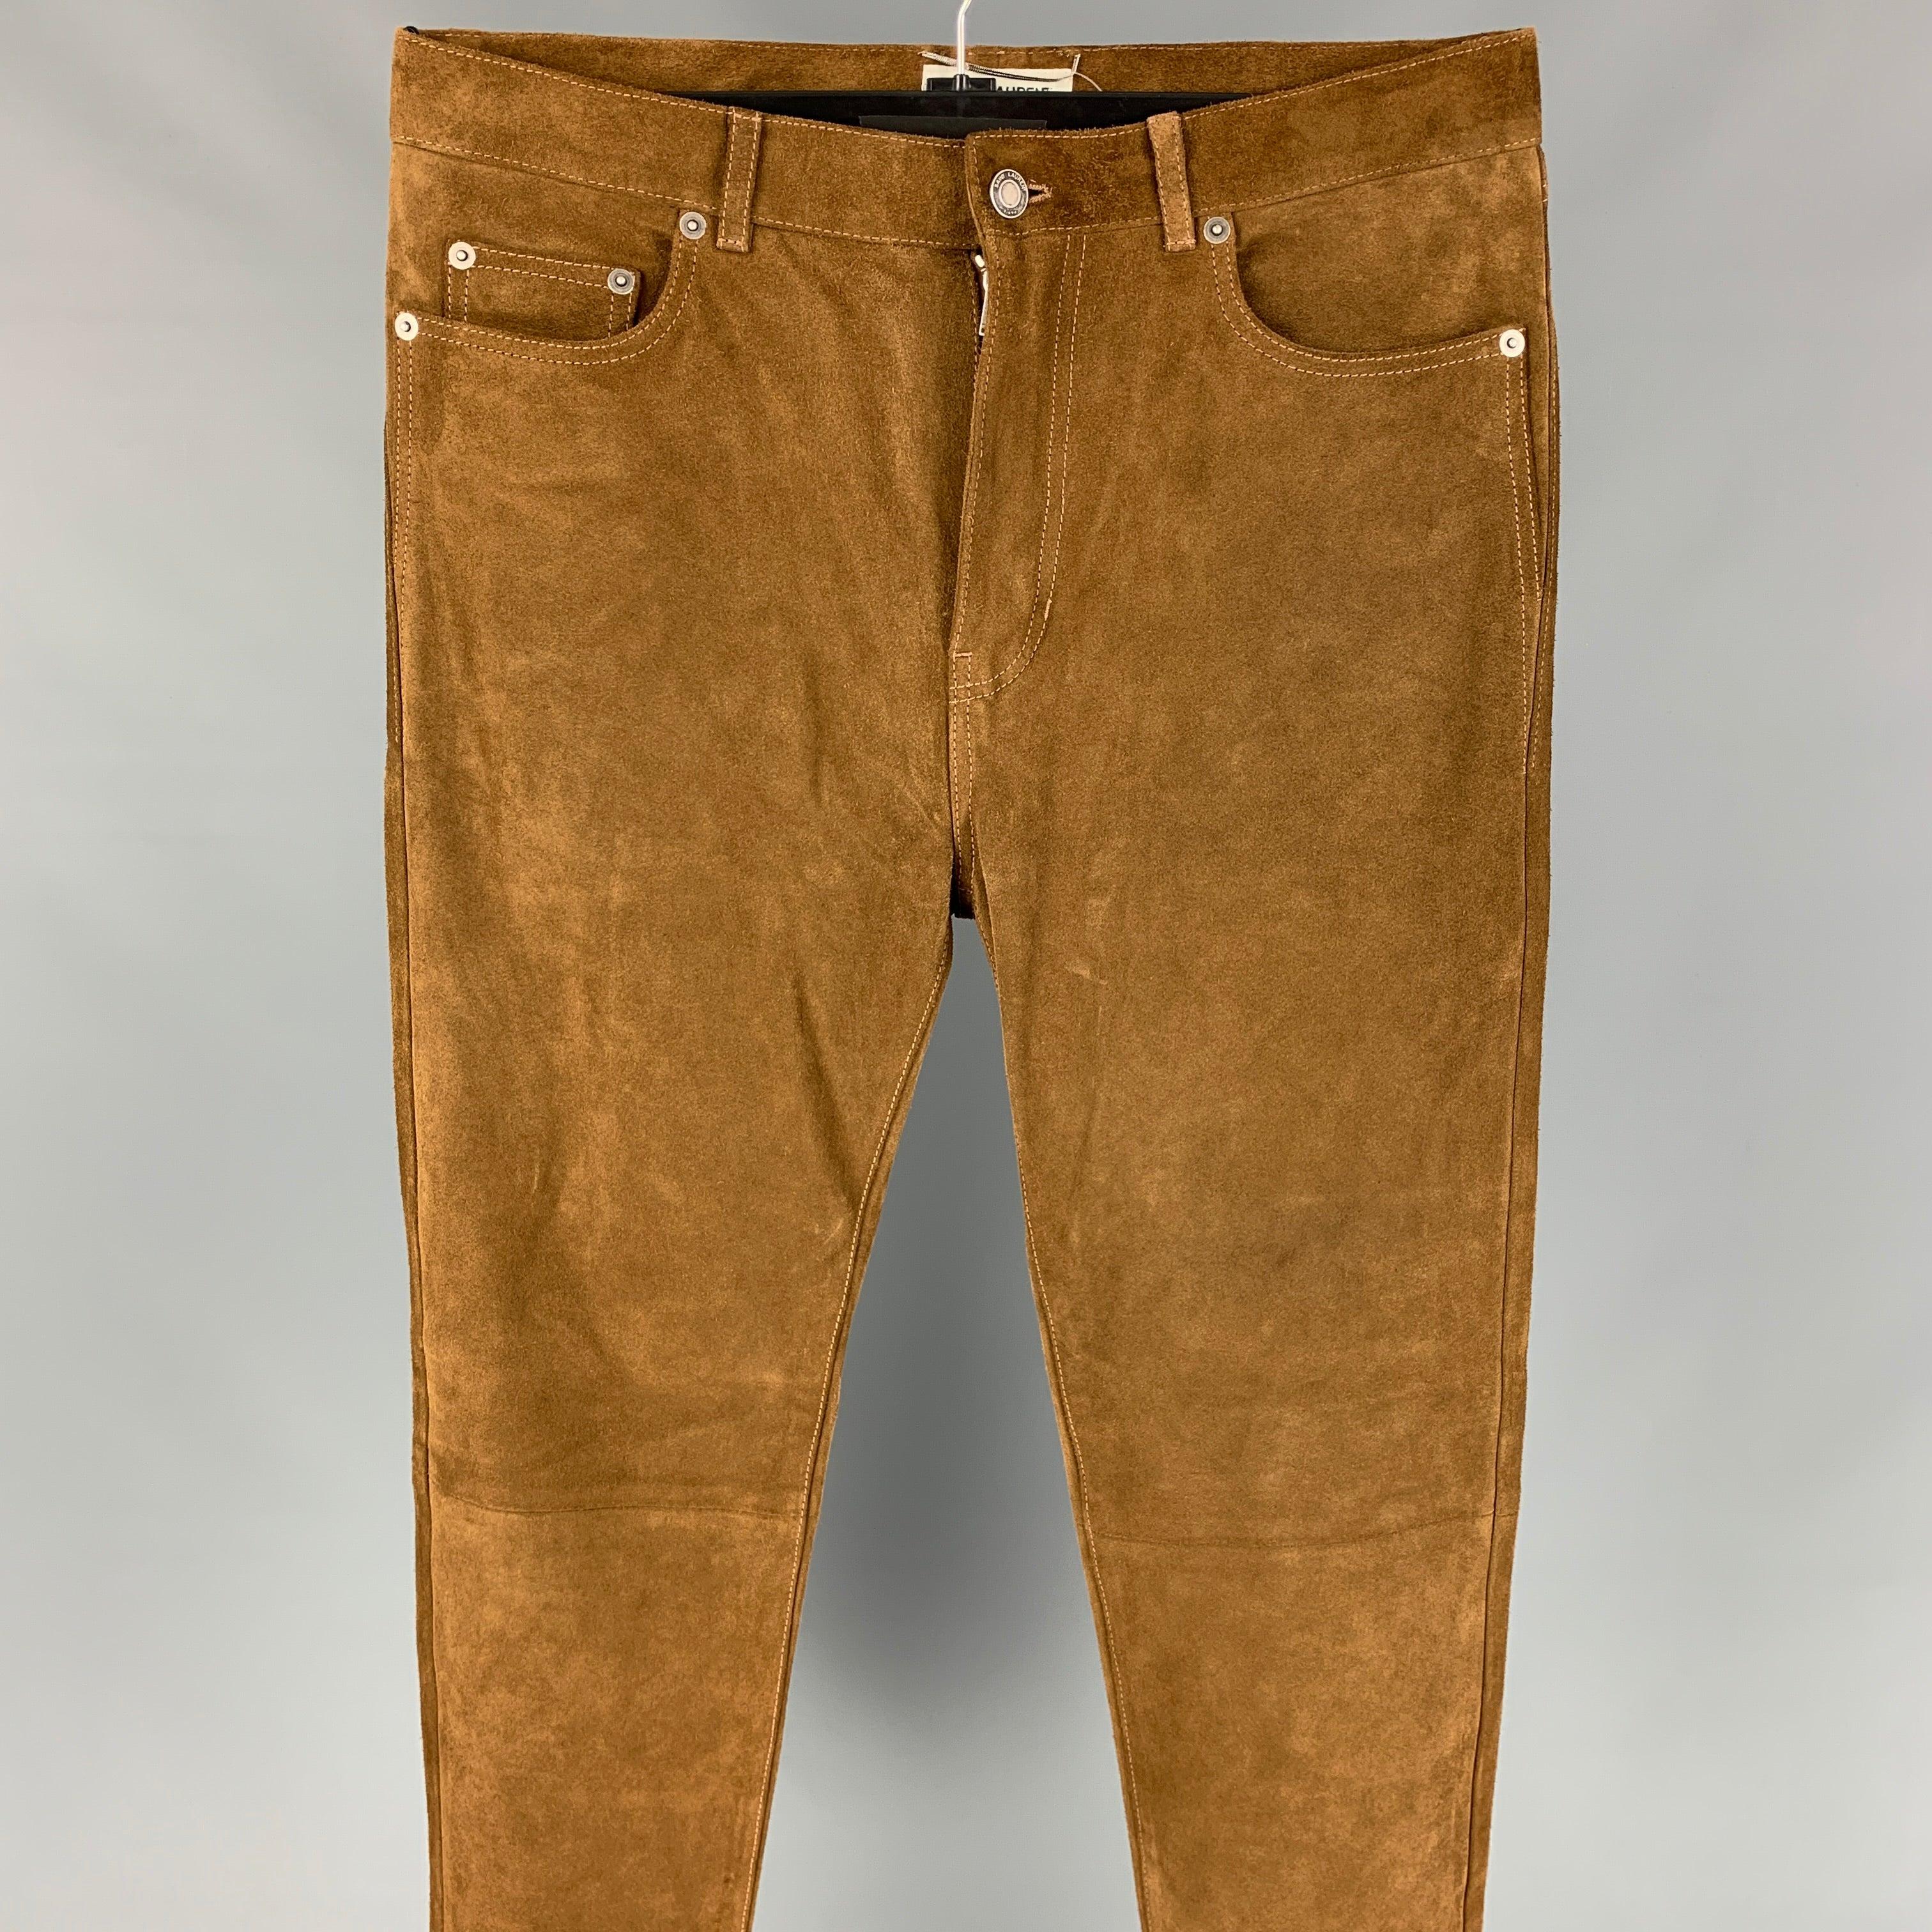 SAINT LAURENT casual pants comes in a brown & tan suede with silk lining featuring a slim fit, contrast stitching, and a zip fly closure. Made in Italy.
Excellent
Pre-Owned Condition. 

Marked:   46 

Measurements: 
  Waist: 32 inches  Rise: 11